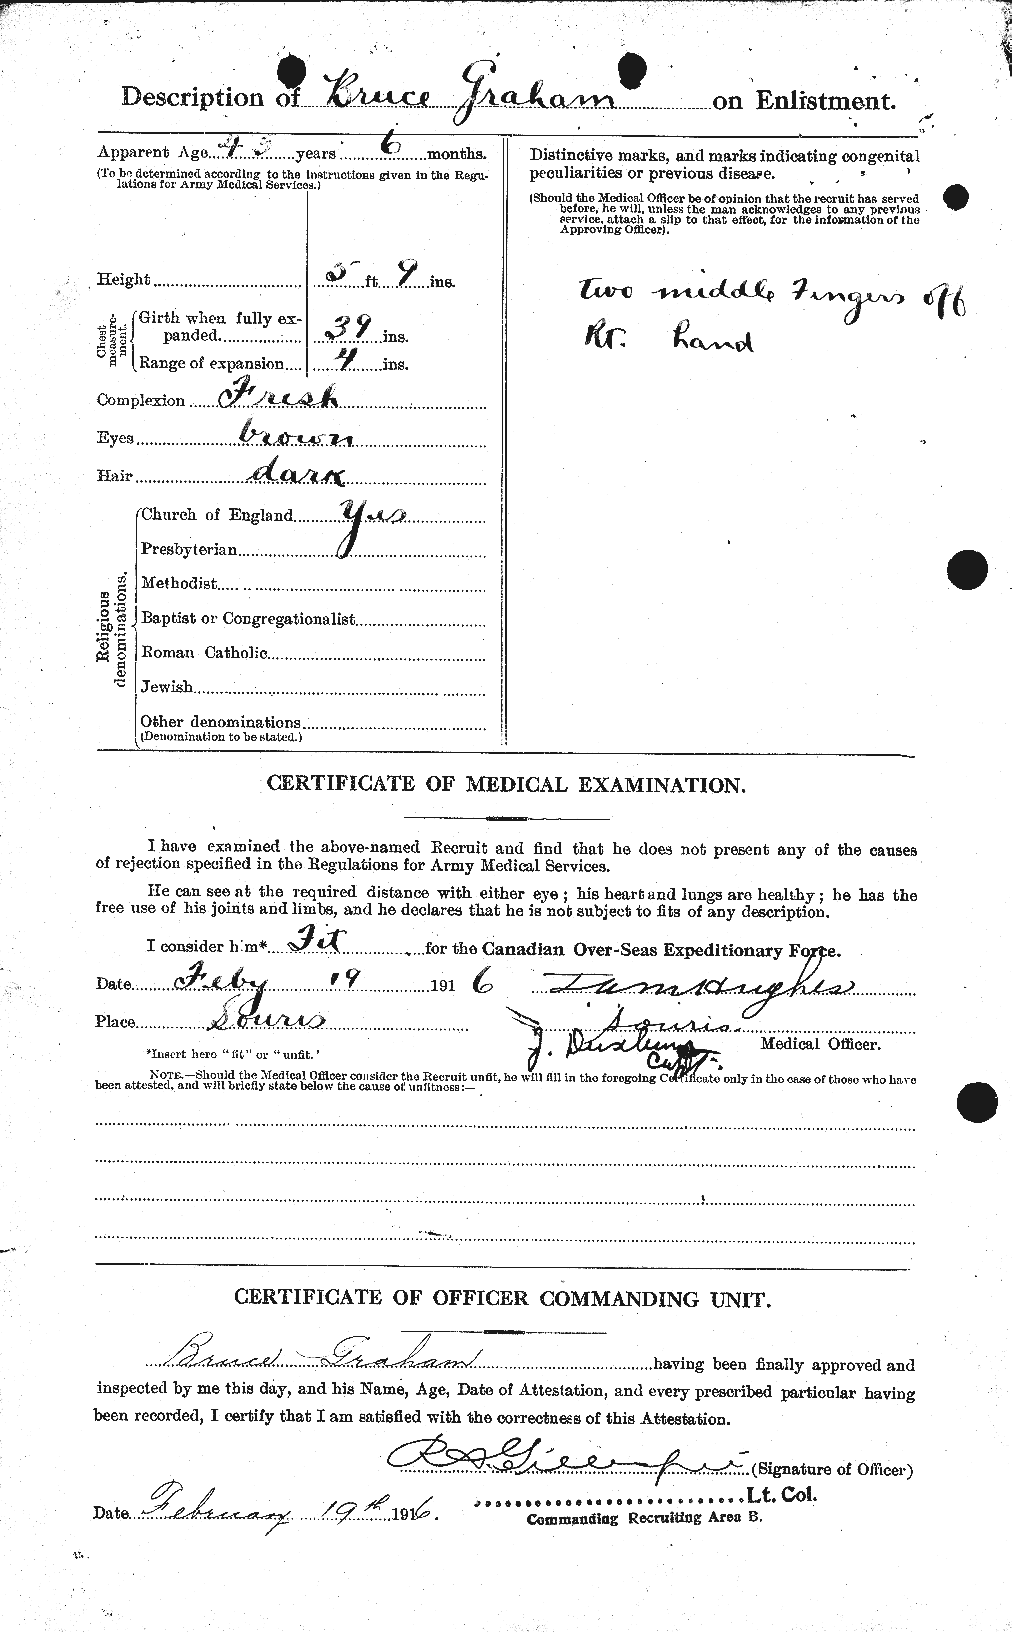 Personnel Records of the First World War - CEF 359674b